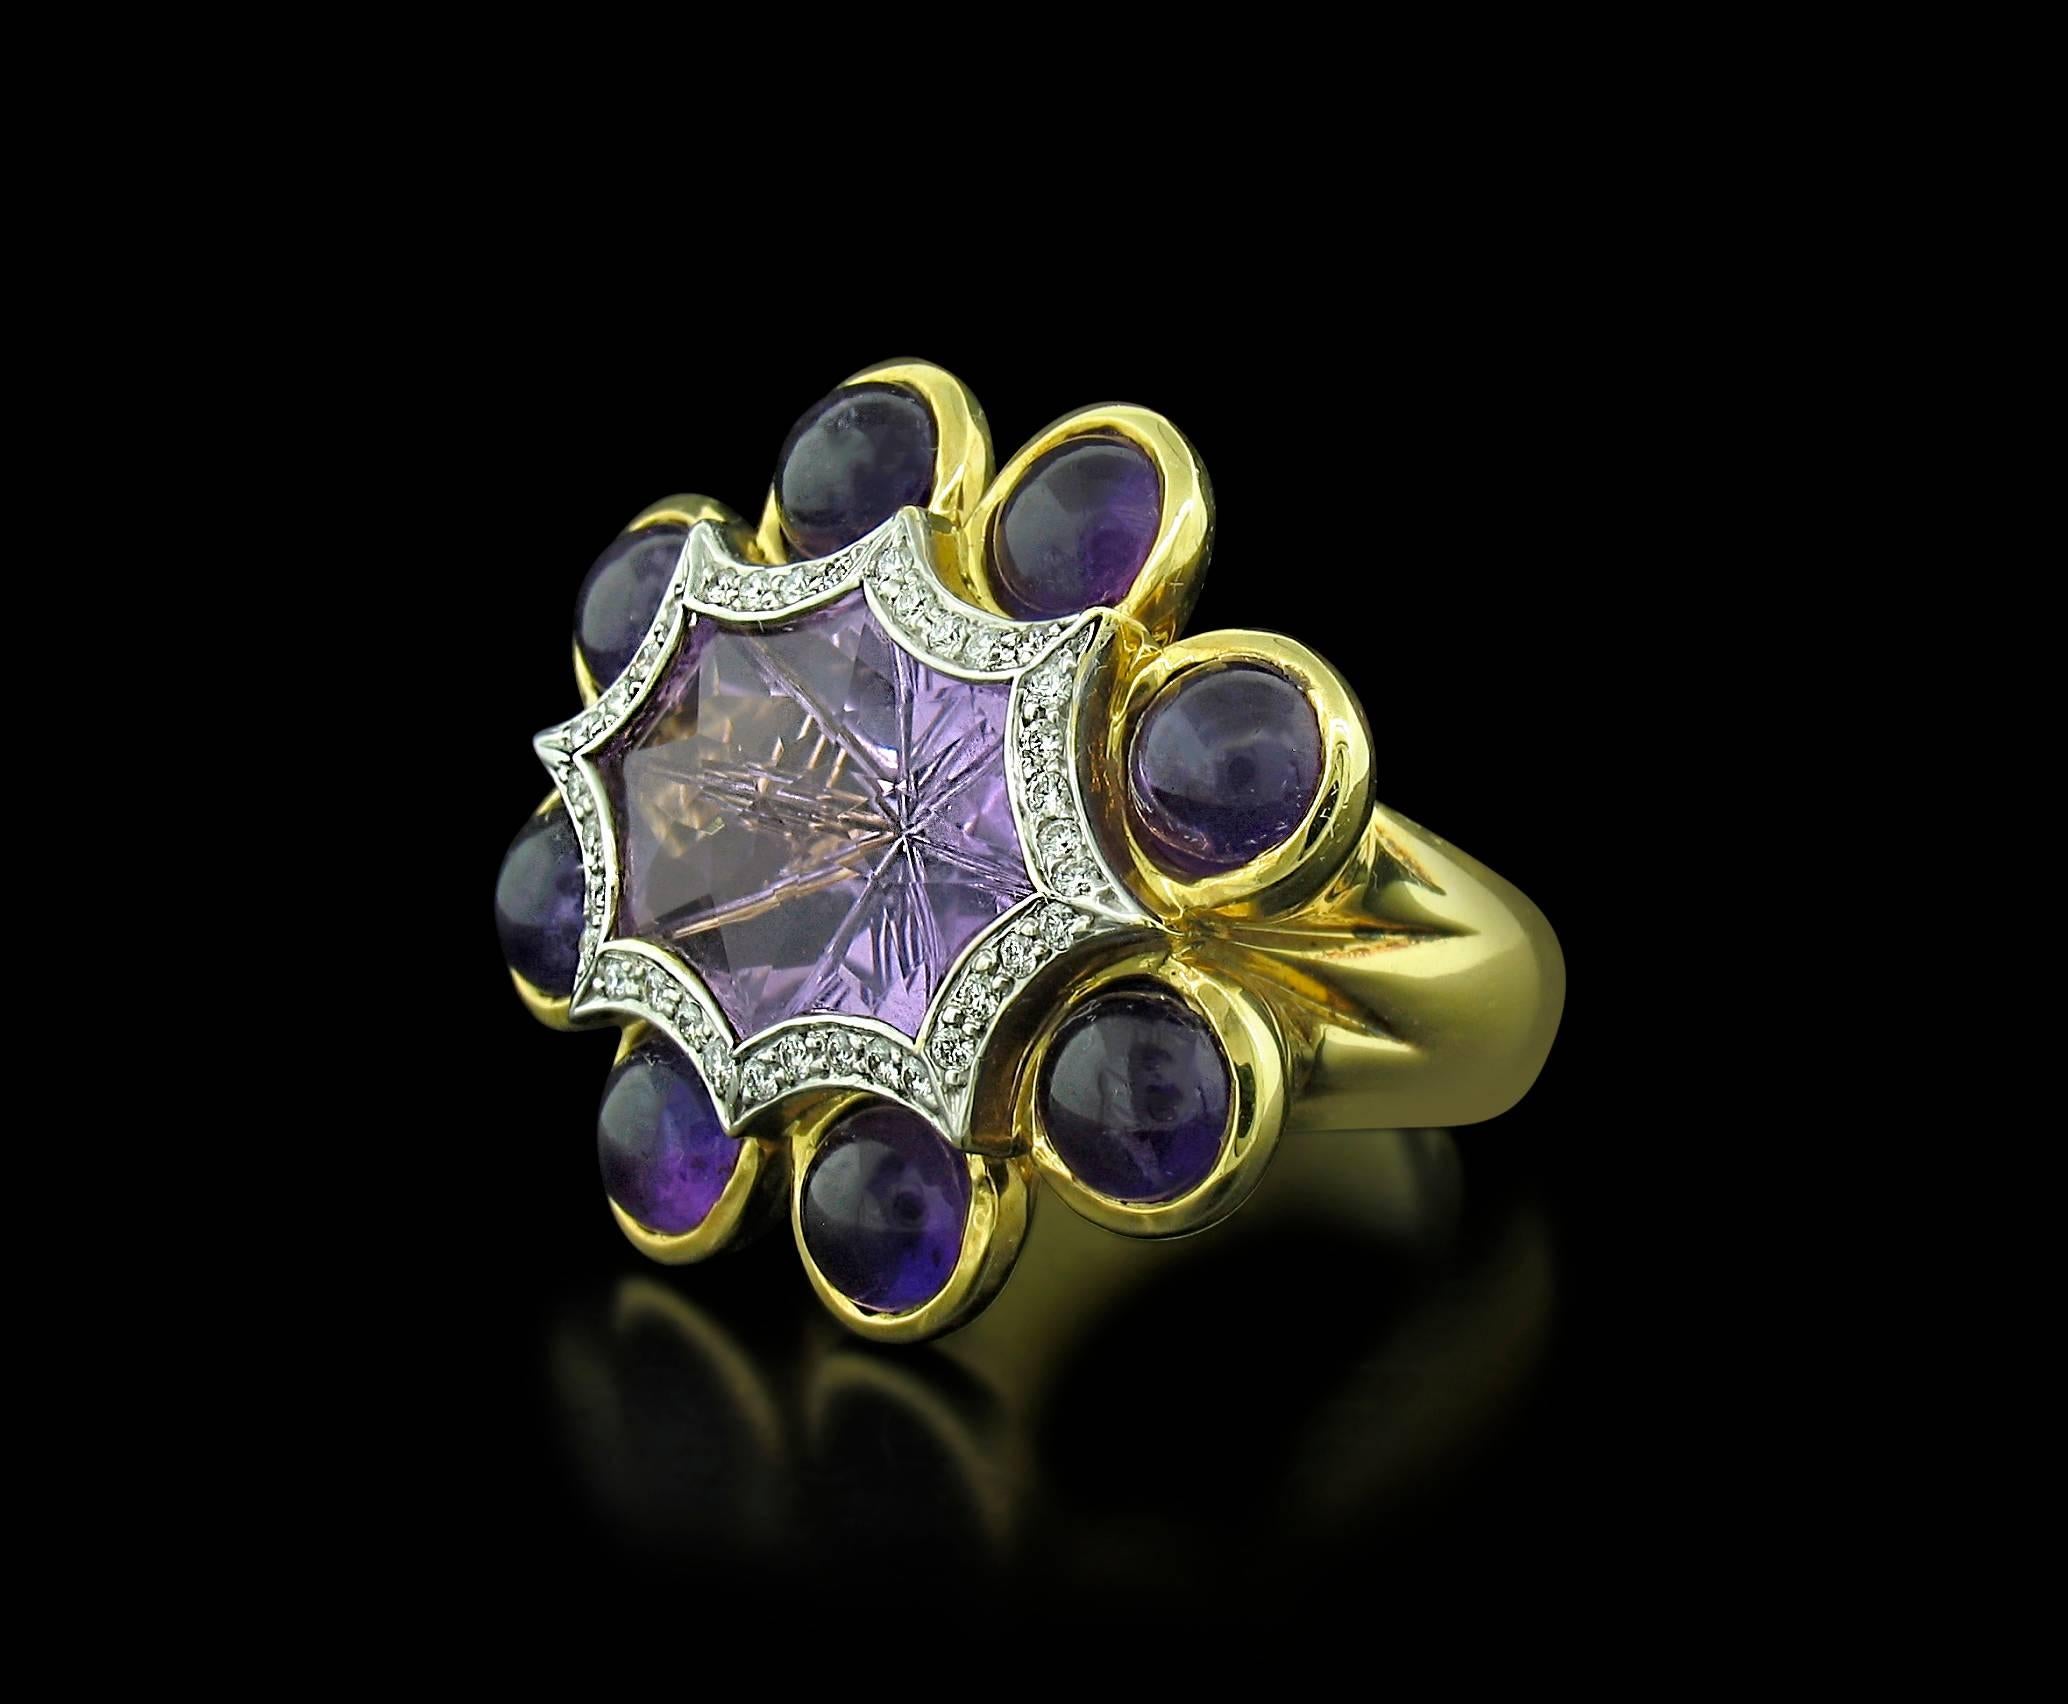 Tony Duquette Amethyst and Diamond Ring in 18K yellow gold features an unusual carved Amethyst in the center surrounded by 8 round, cabochon Amethysts weighing a total of 13.50 carats and accented with 0.23 carats of Diamond pave set in 18k white